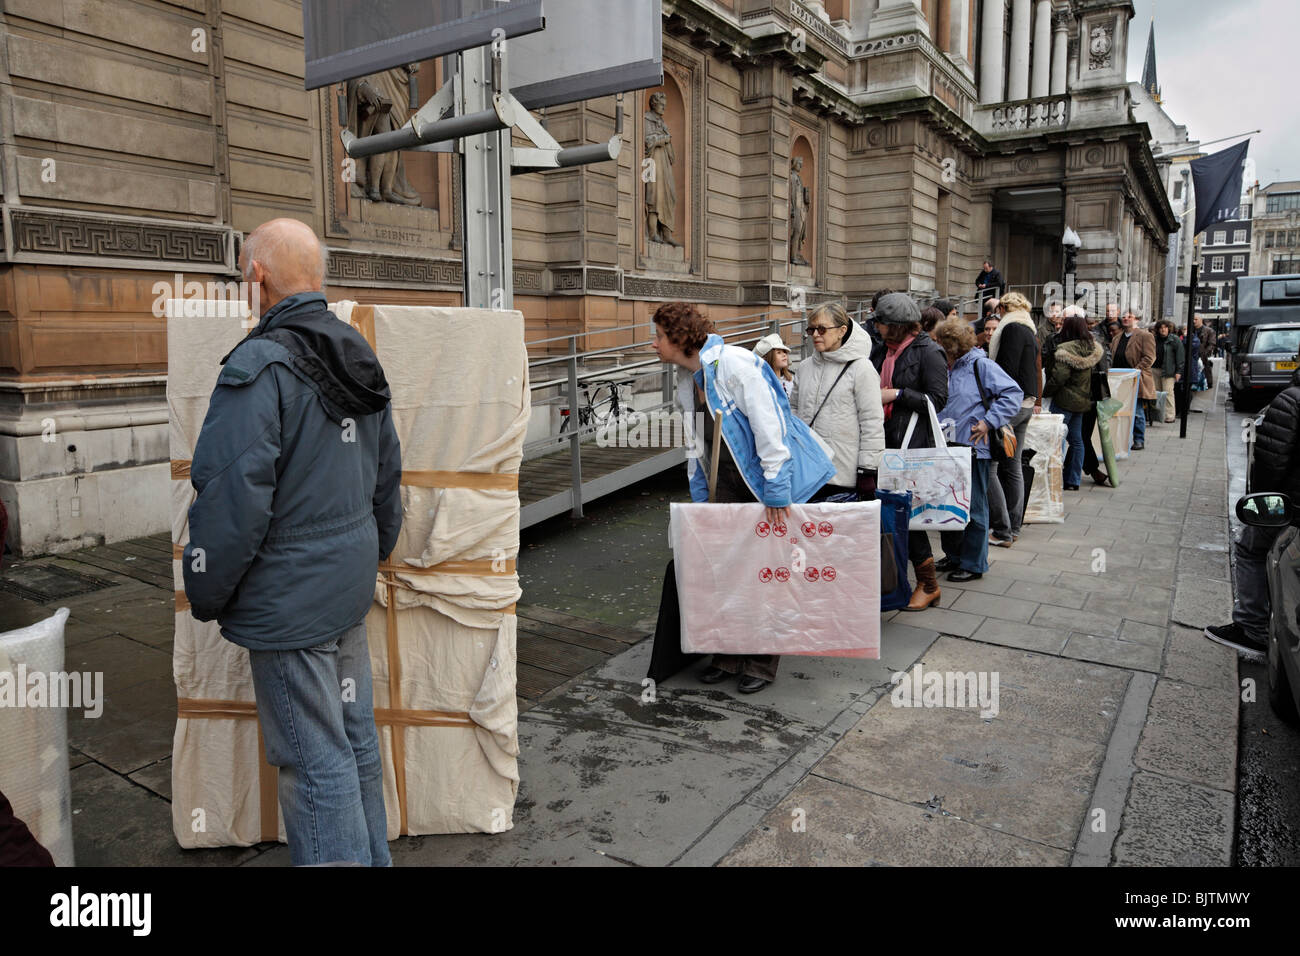 Artists queuing outside The Royal Academy of Arts, London. Stock Photo